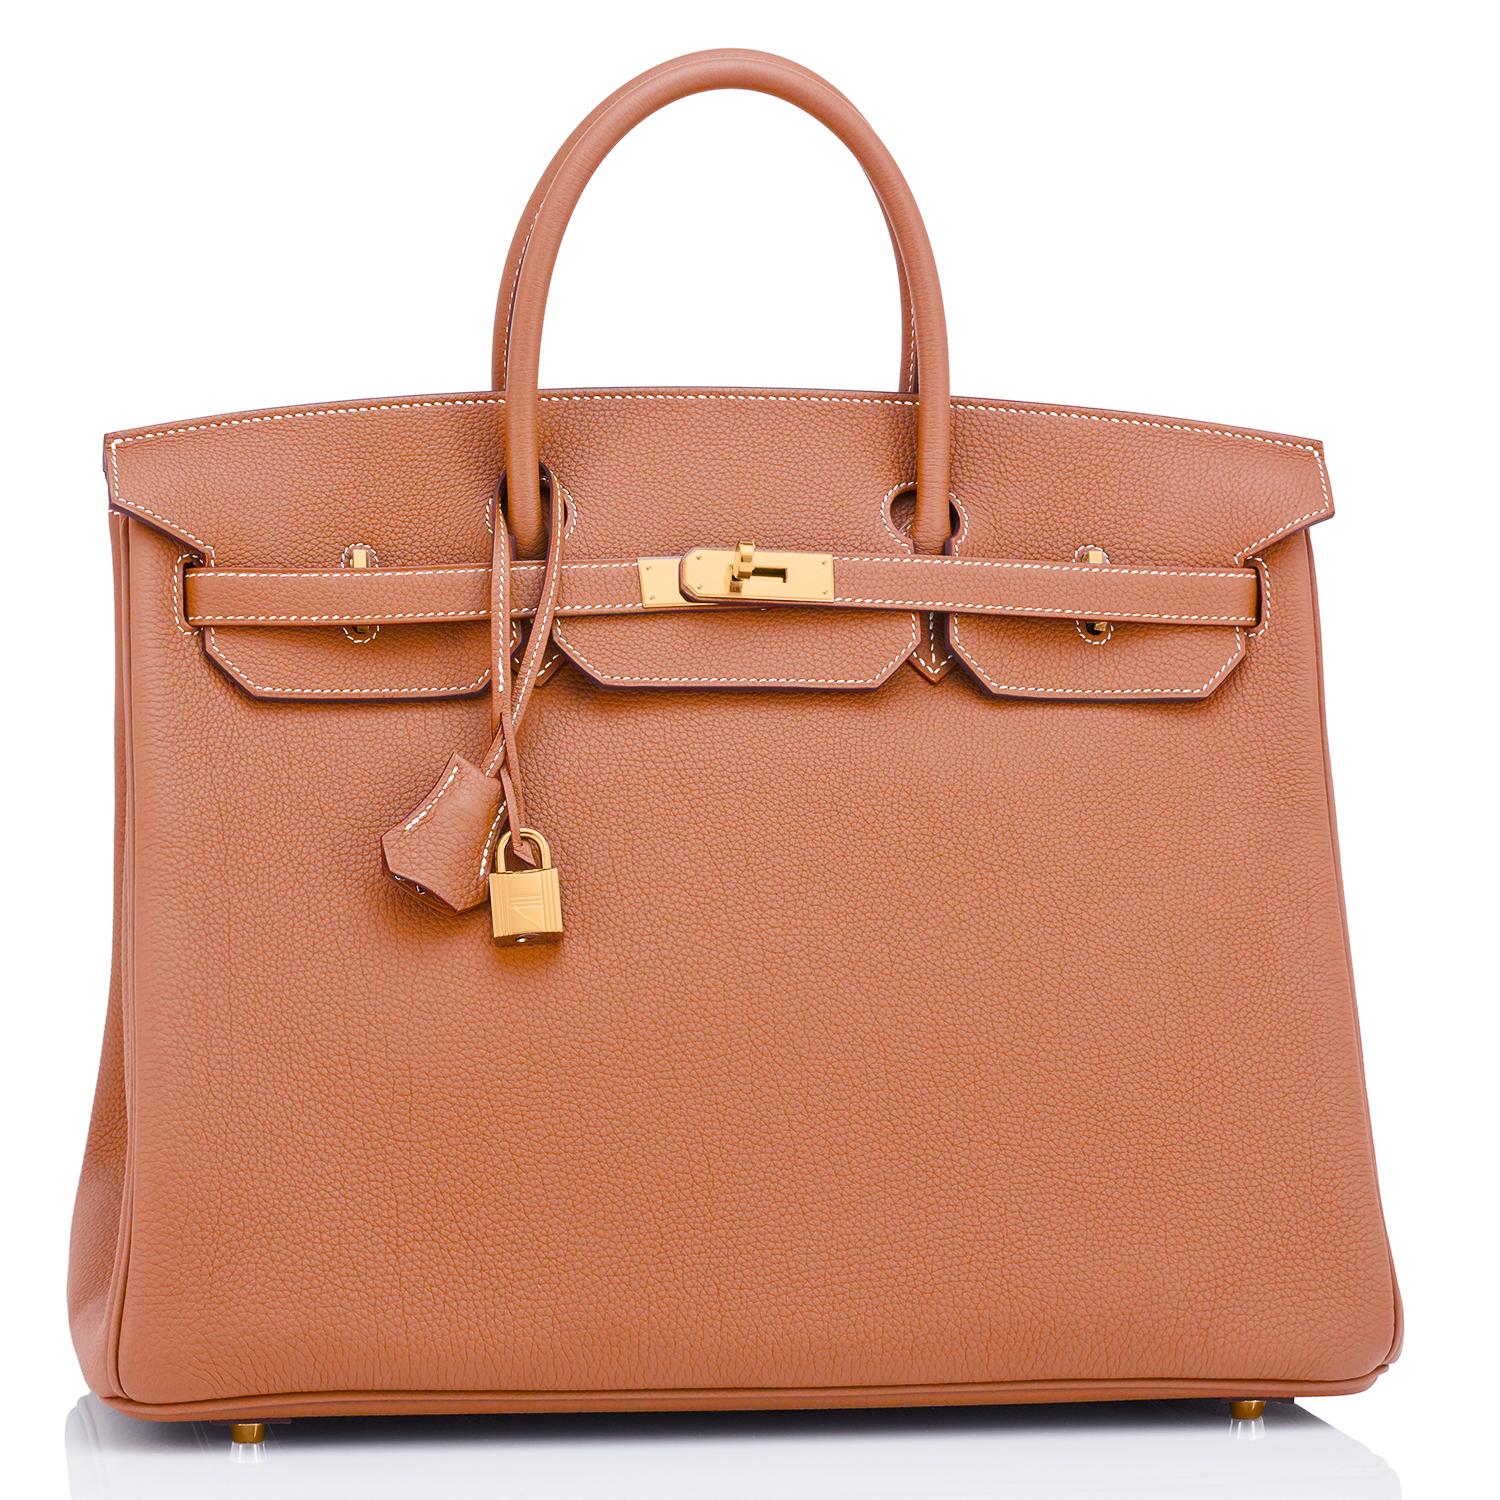 how much is a new birkin bag